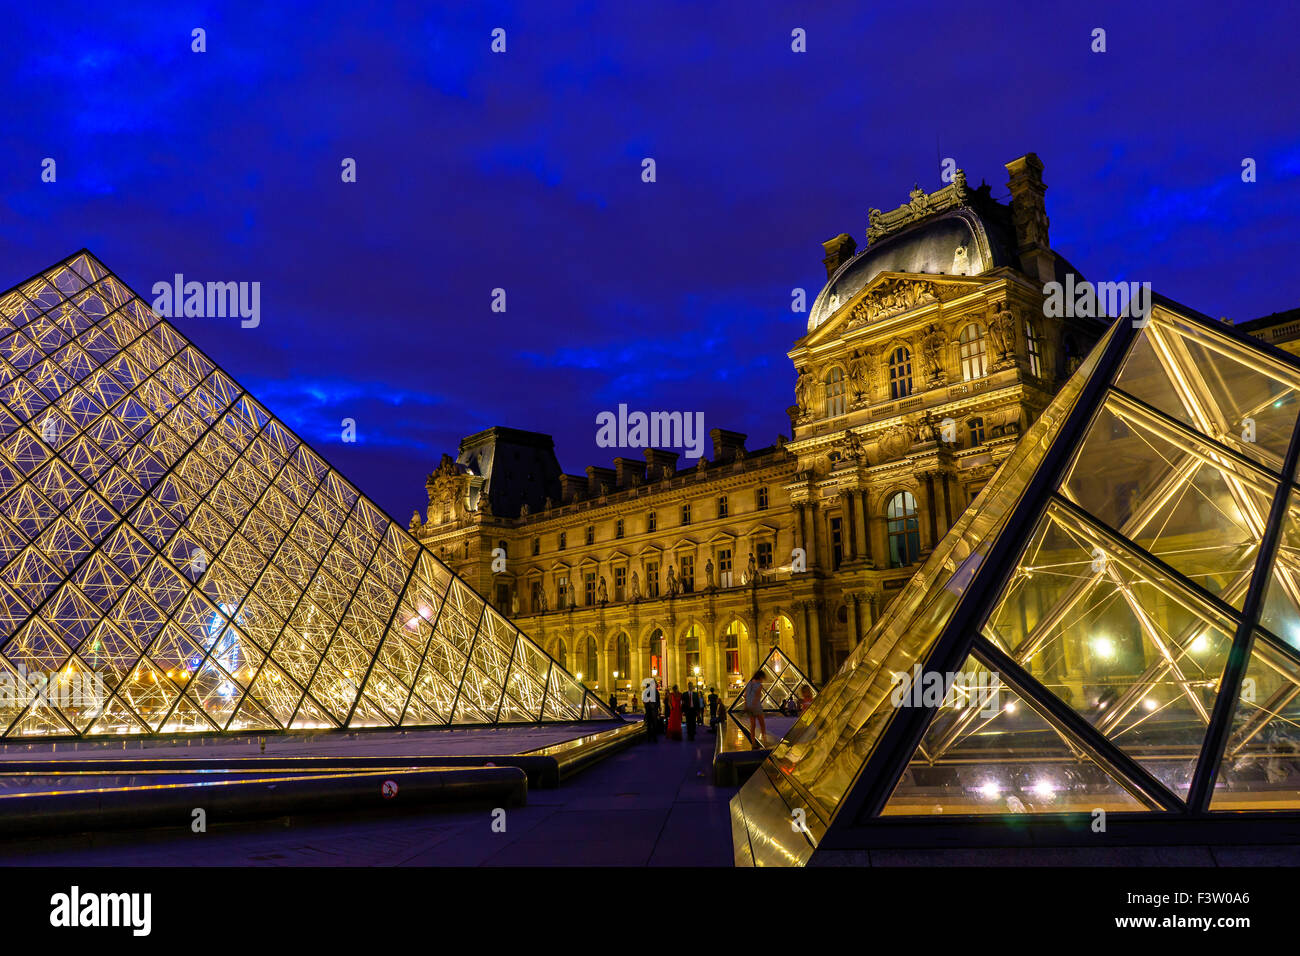 Dusk falls over two pyramids at the Louvre museum. Paris, France. August, 2015. Stock Photo